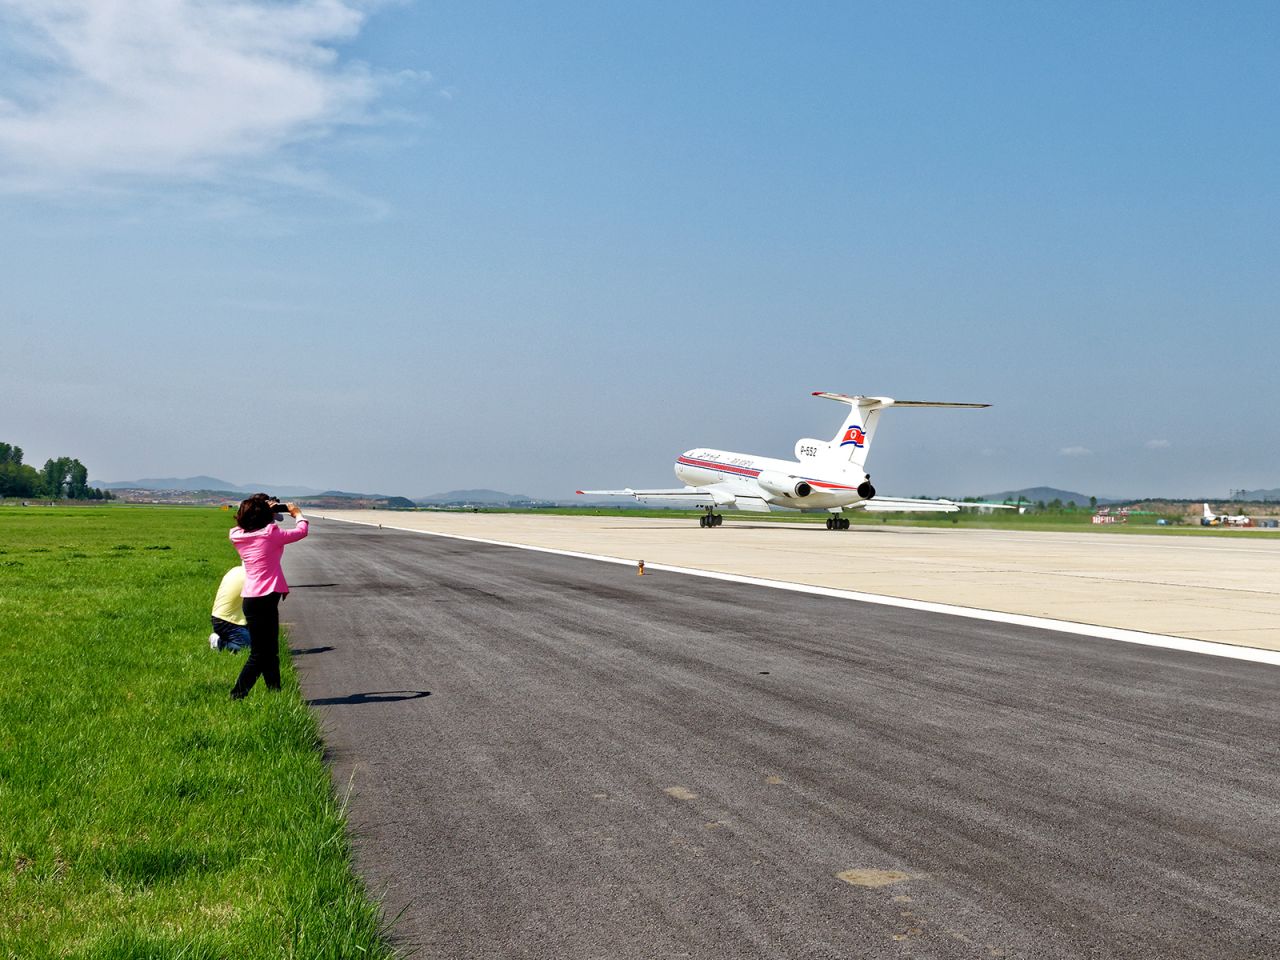 International sanctions have forced North Korea's Air Koryo airlines to make do with rare airplanes dating back to the Cold War. For years, hard-core aviation enthusiasts have traveled to Pyongyang looking for thrilling flights on Russian aircraft like this Tupolev Tu-154. 